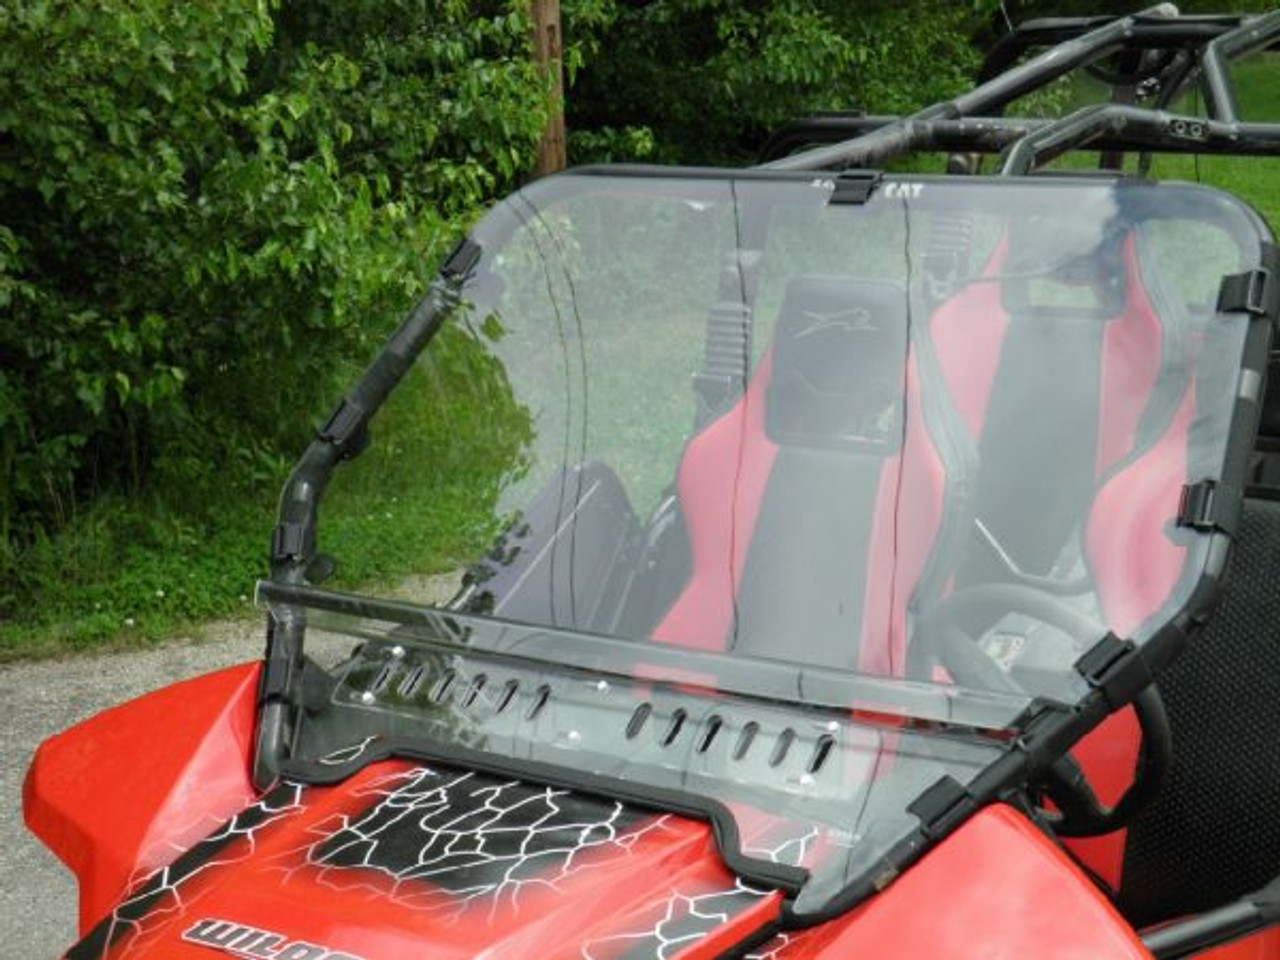 3 Star, side x side, arctic cat, wildcat 4, front angle view